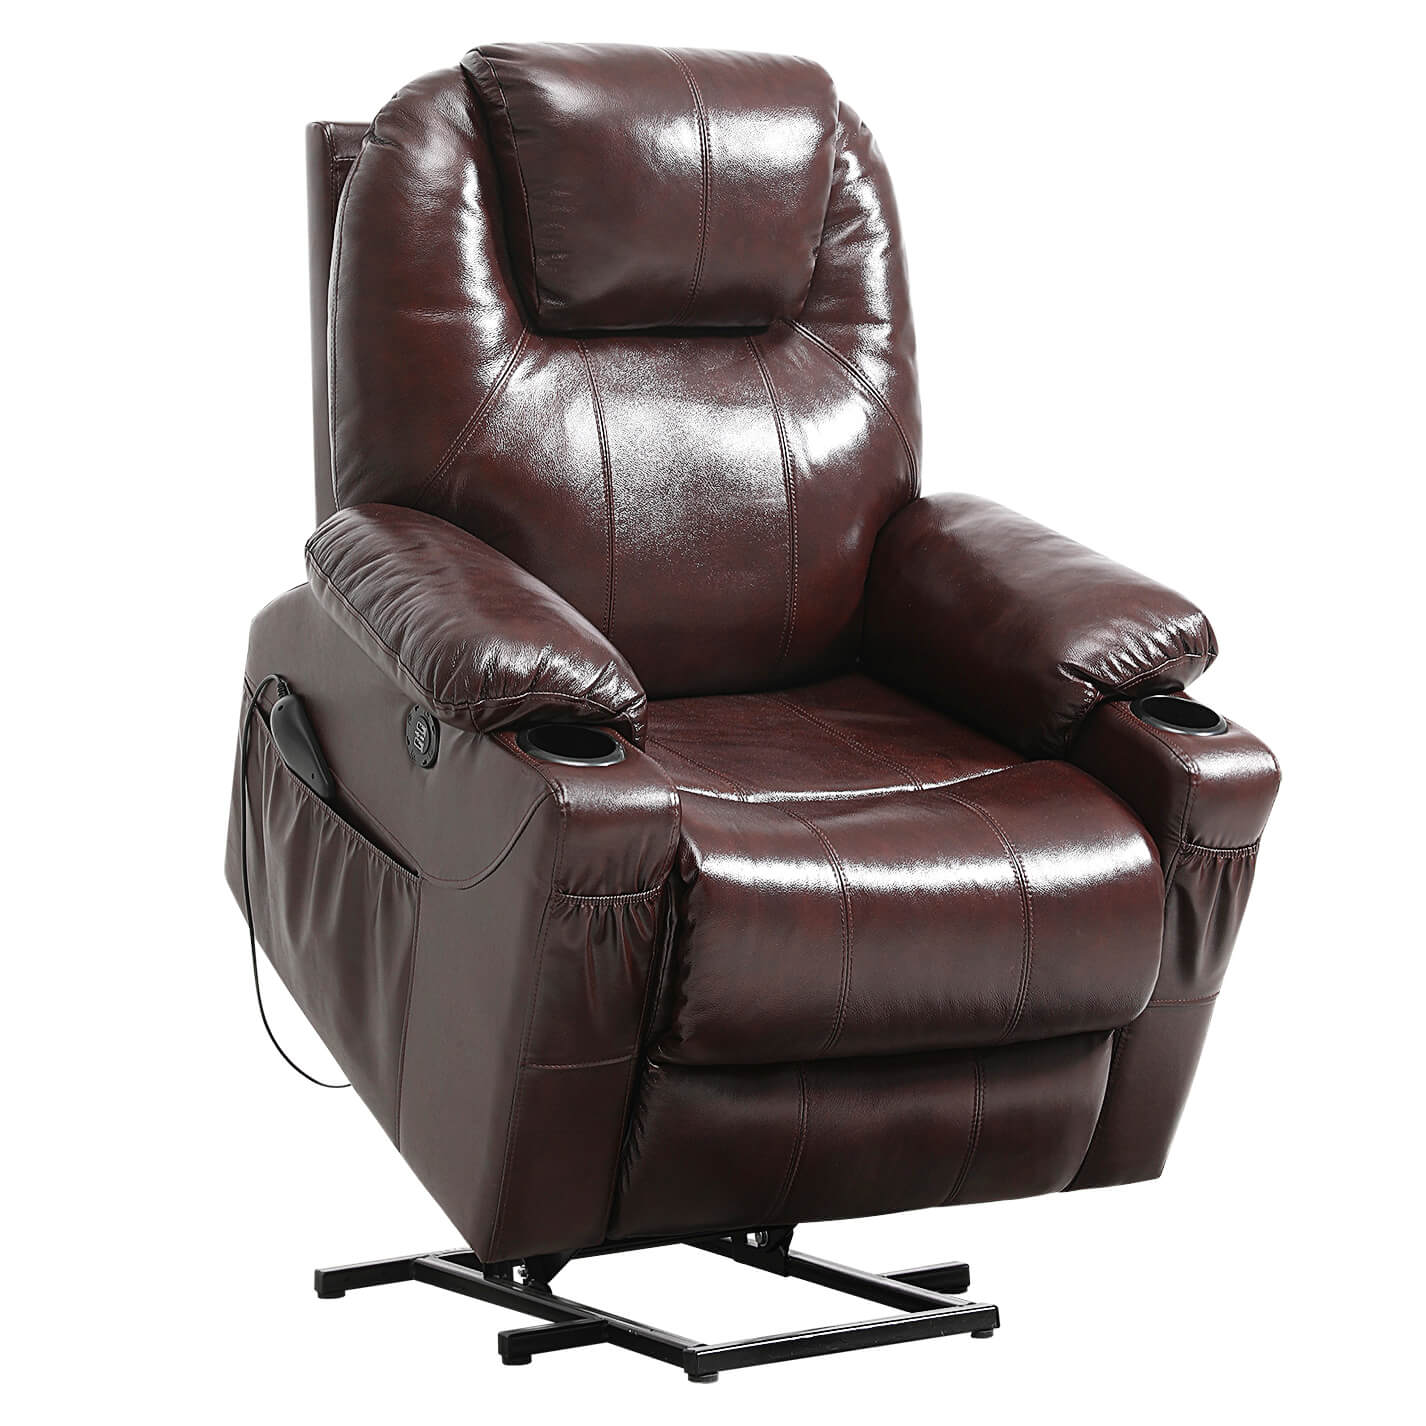 Soulout genuine leather brown lift chairs